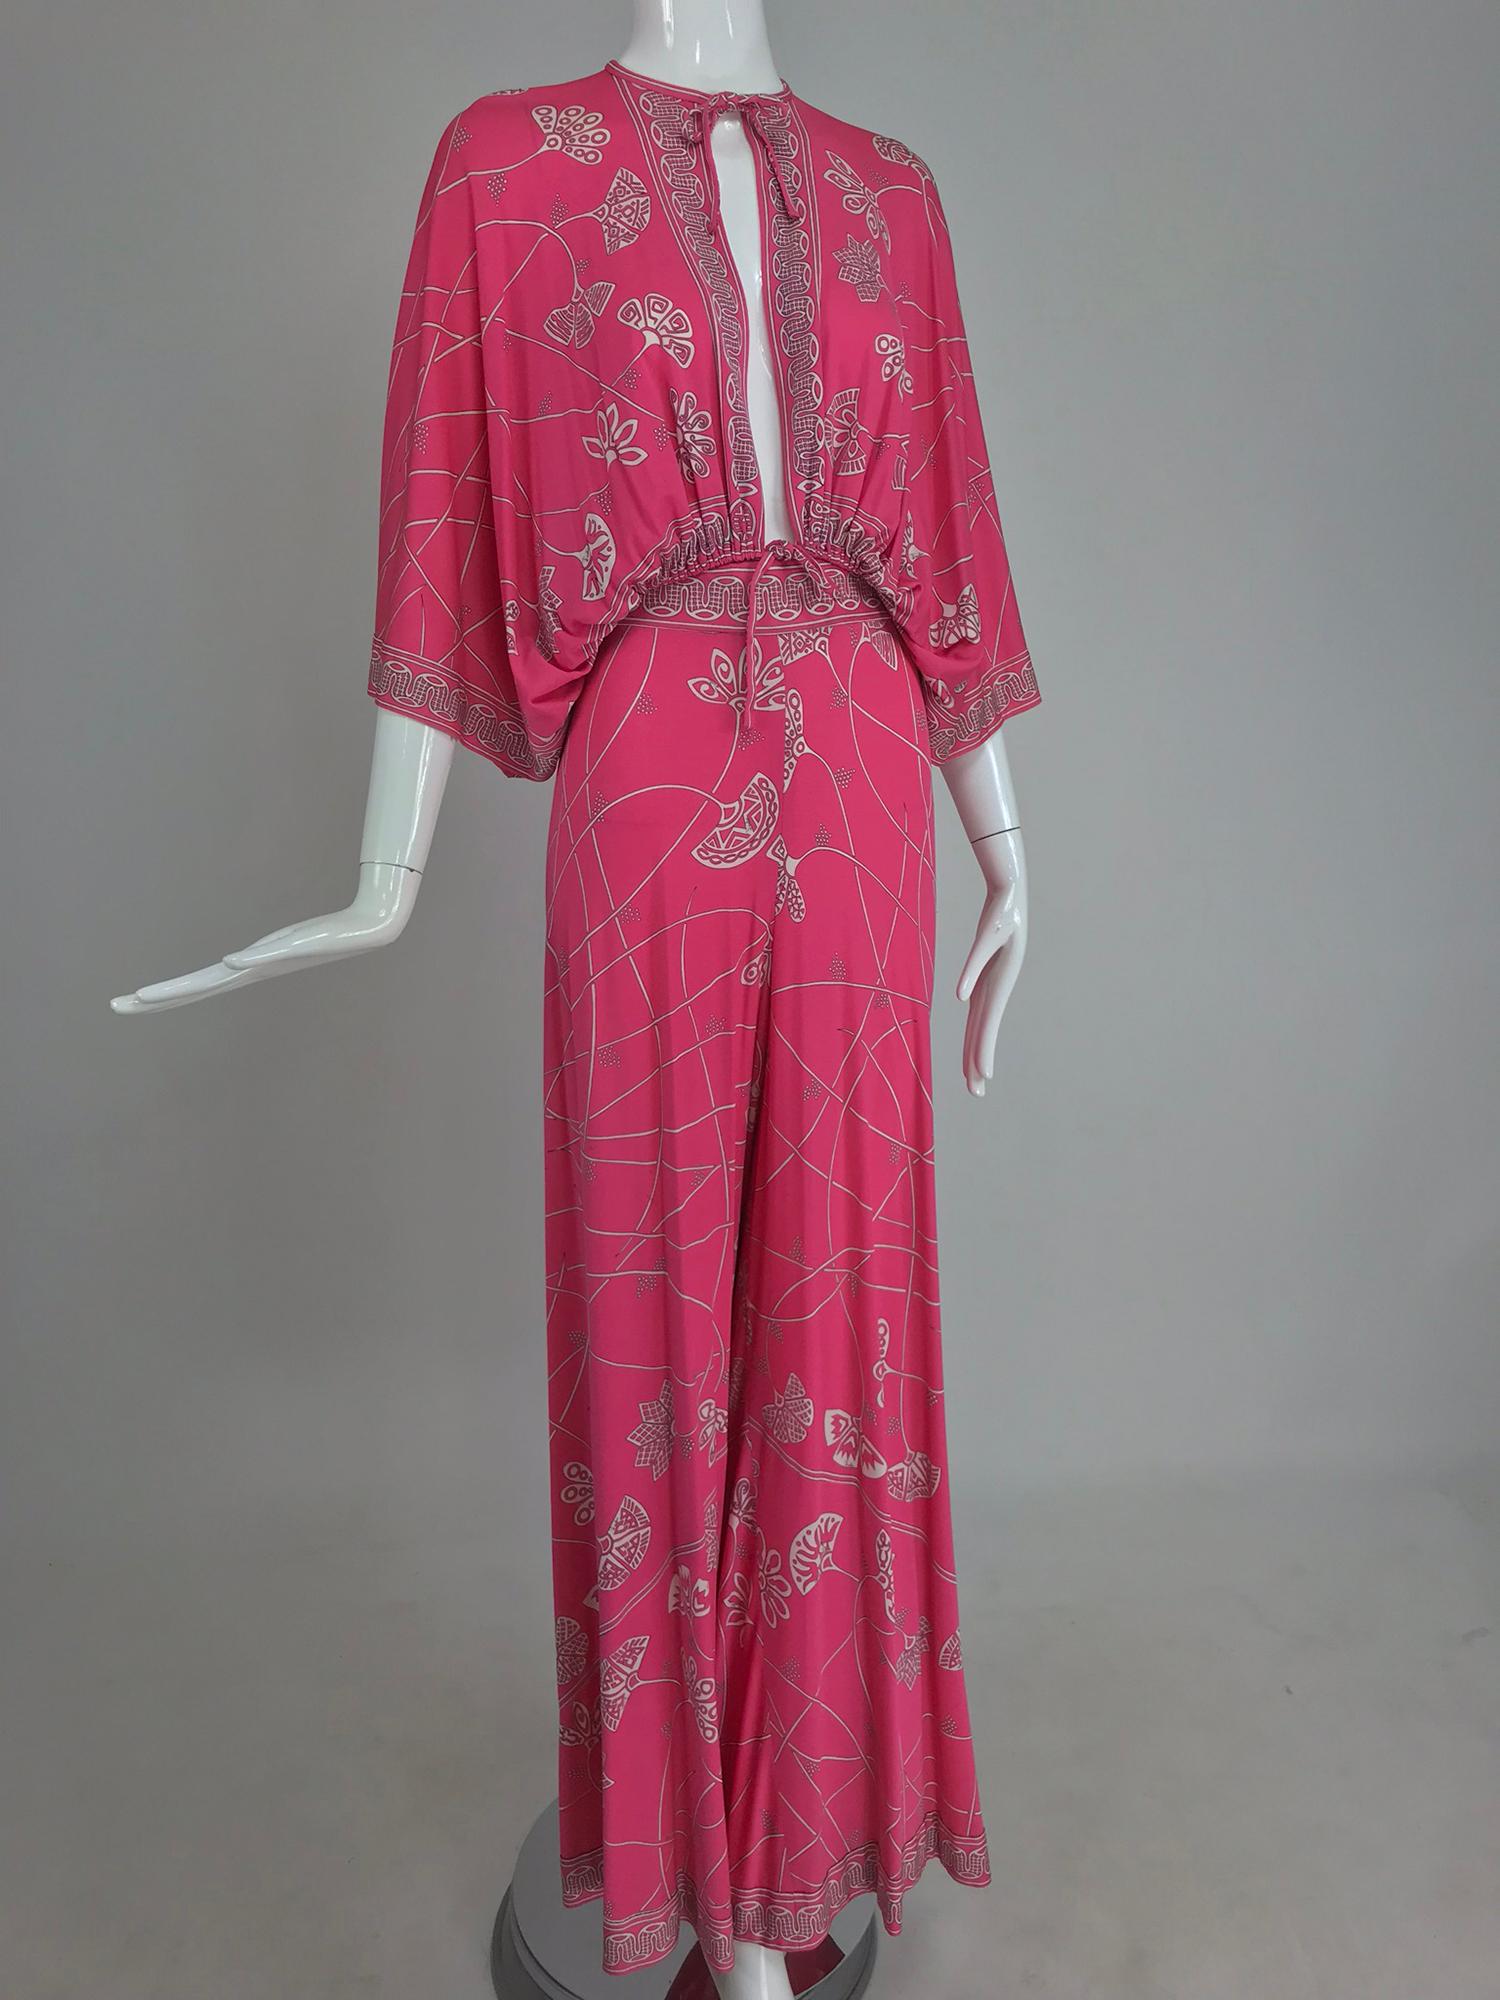 Emilio Pucci silk jersey plunge top and palazzo trousers, 1970s 6